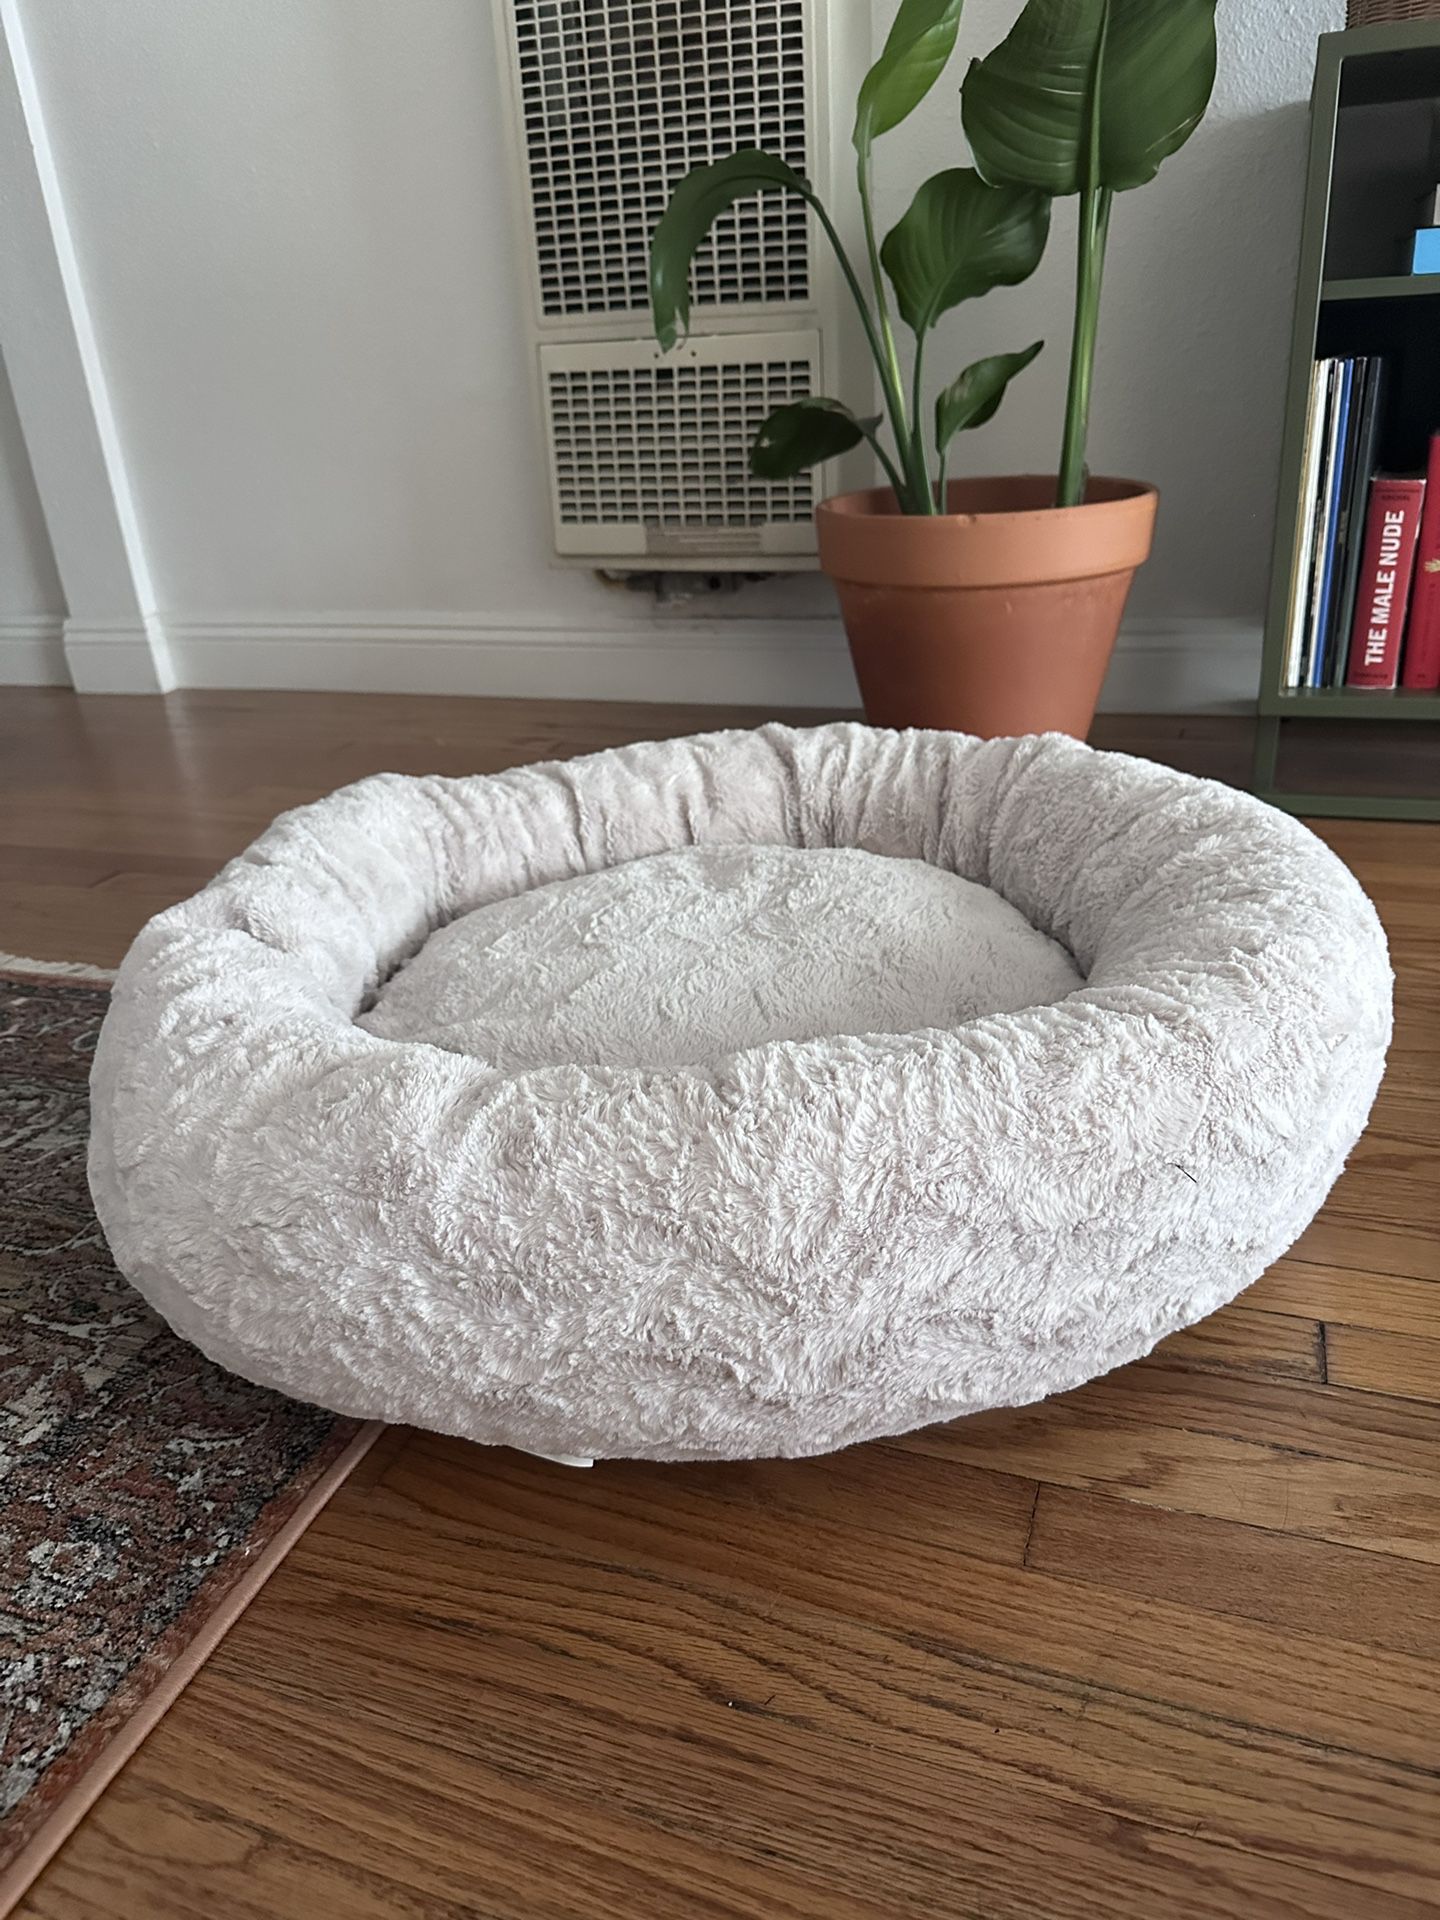 Donut Calming Dog Bed 30 Inches  